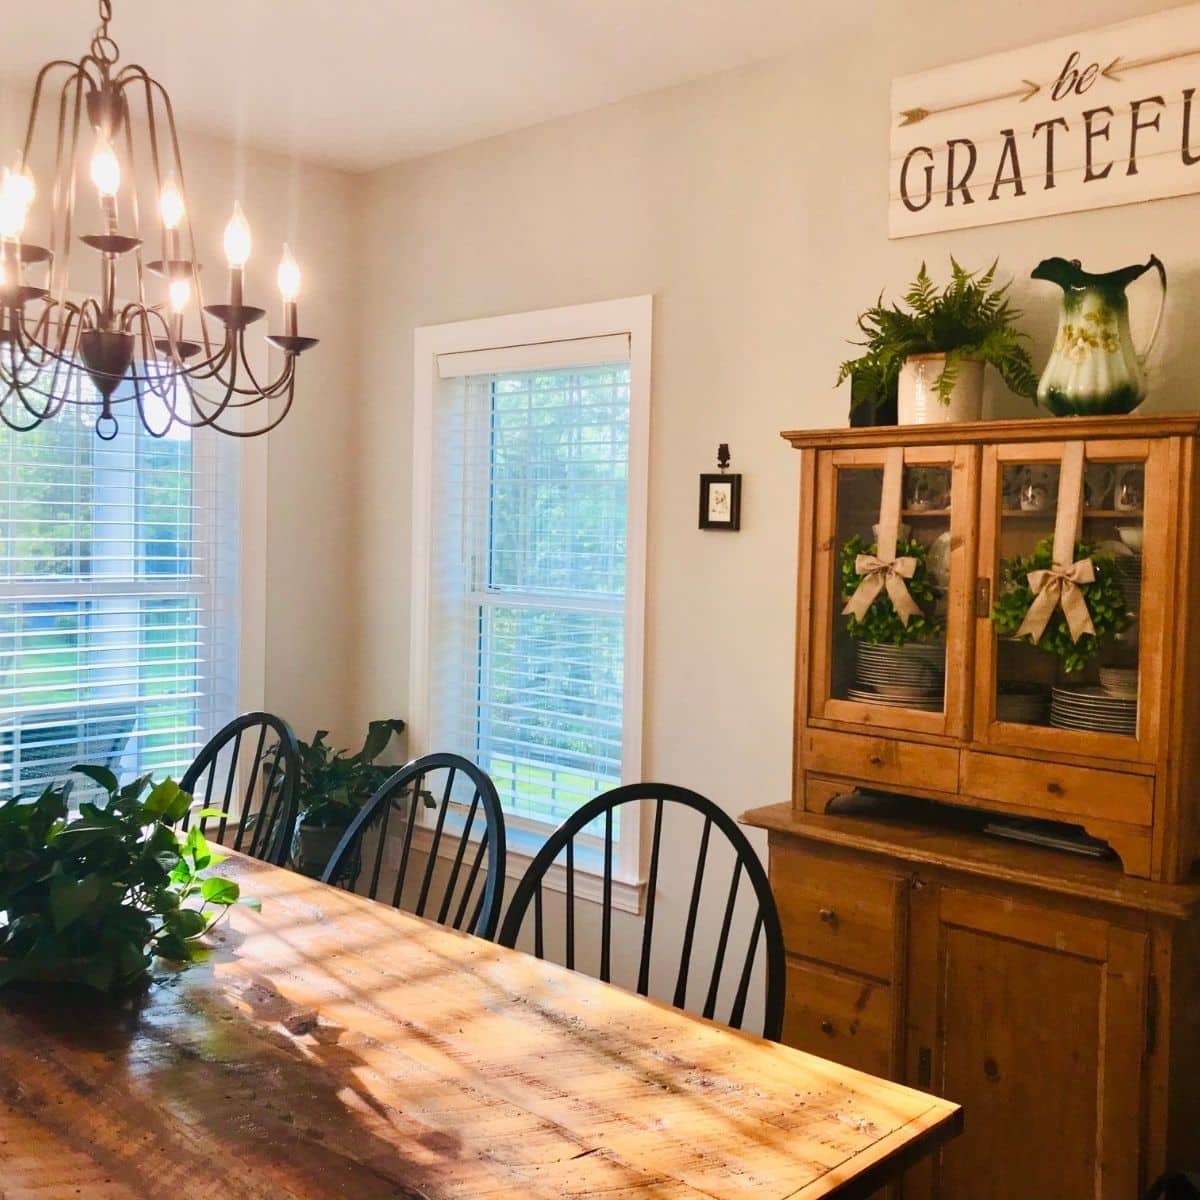 What Are Some Affordable Farmhouse Decor Ideas?